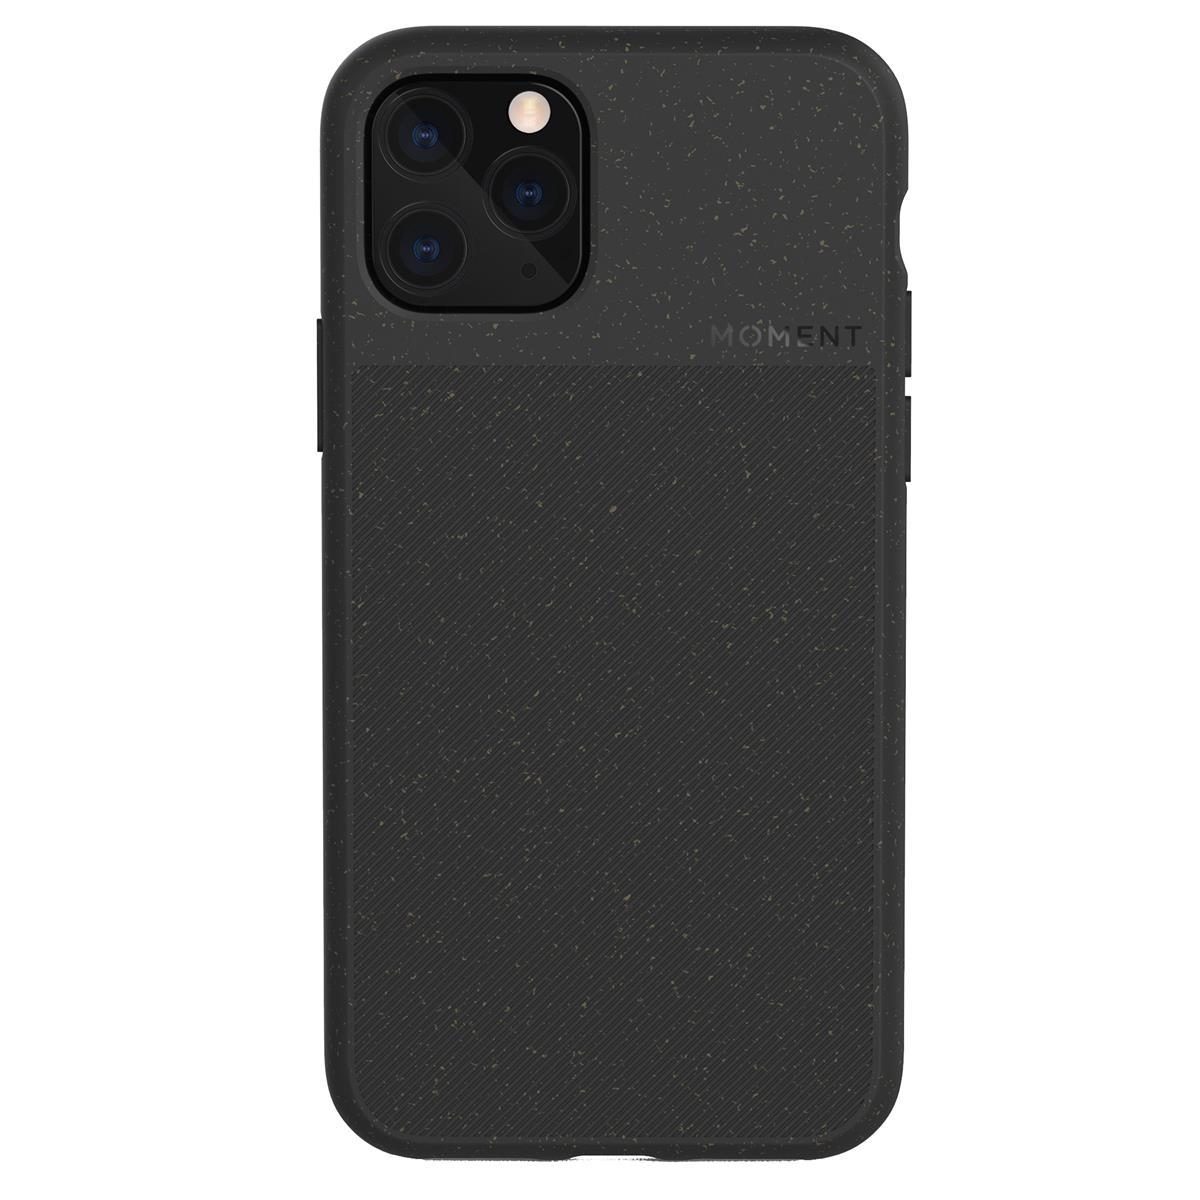 Image of Moment iPhone 11 Biodegradable Case